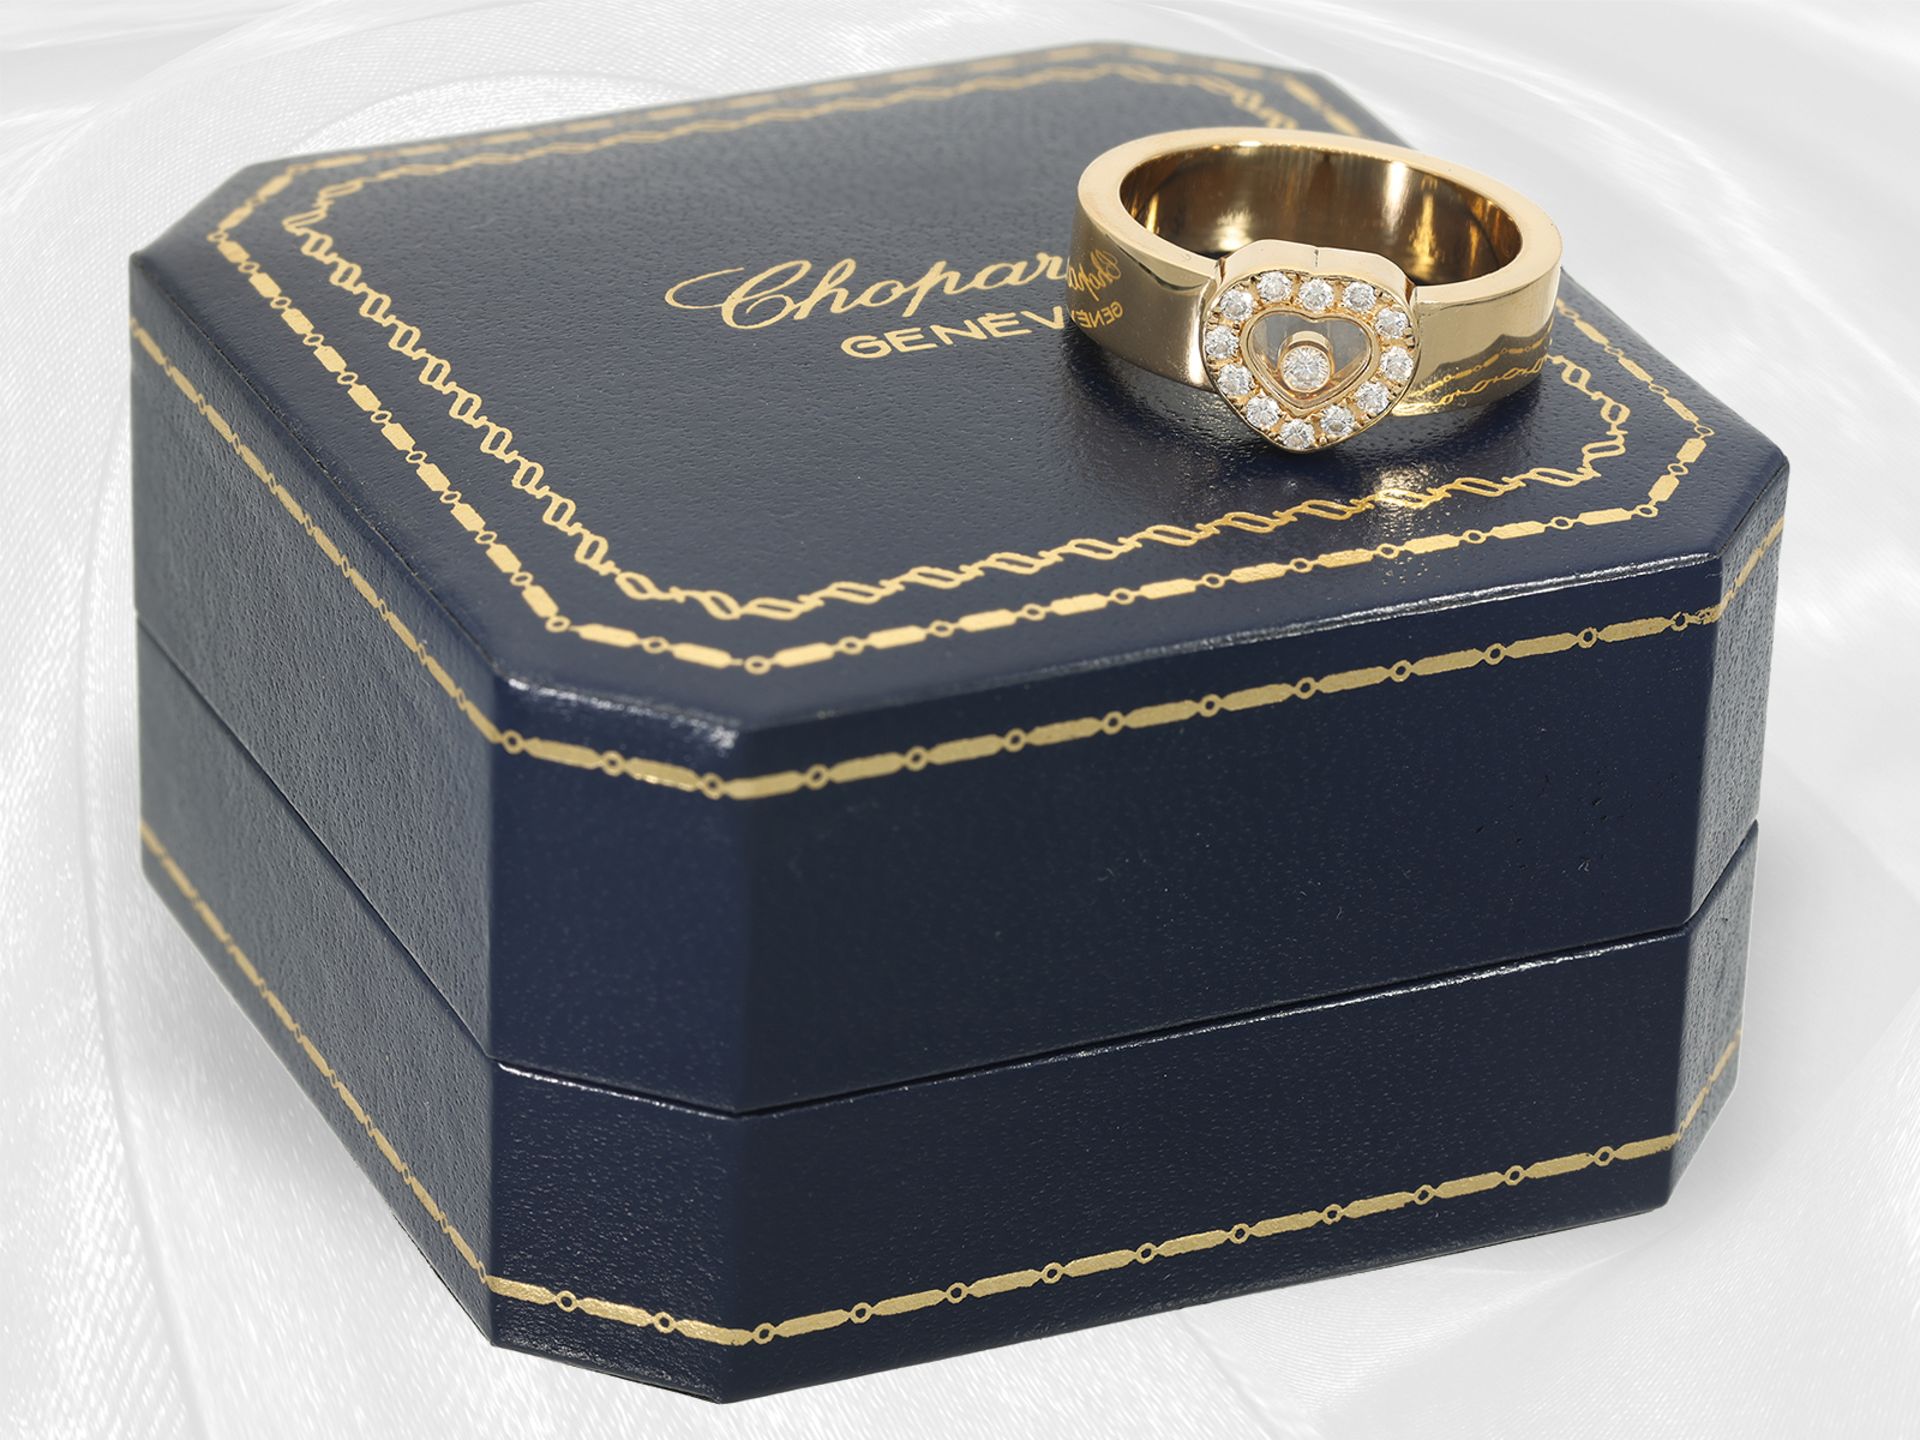 High quality Chopard ring "Happy Diamonds" with Chopard certificate, 18K yellow gold - Image 2 of 5